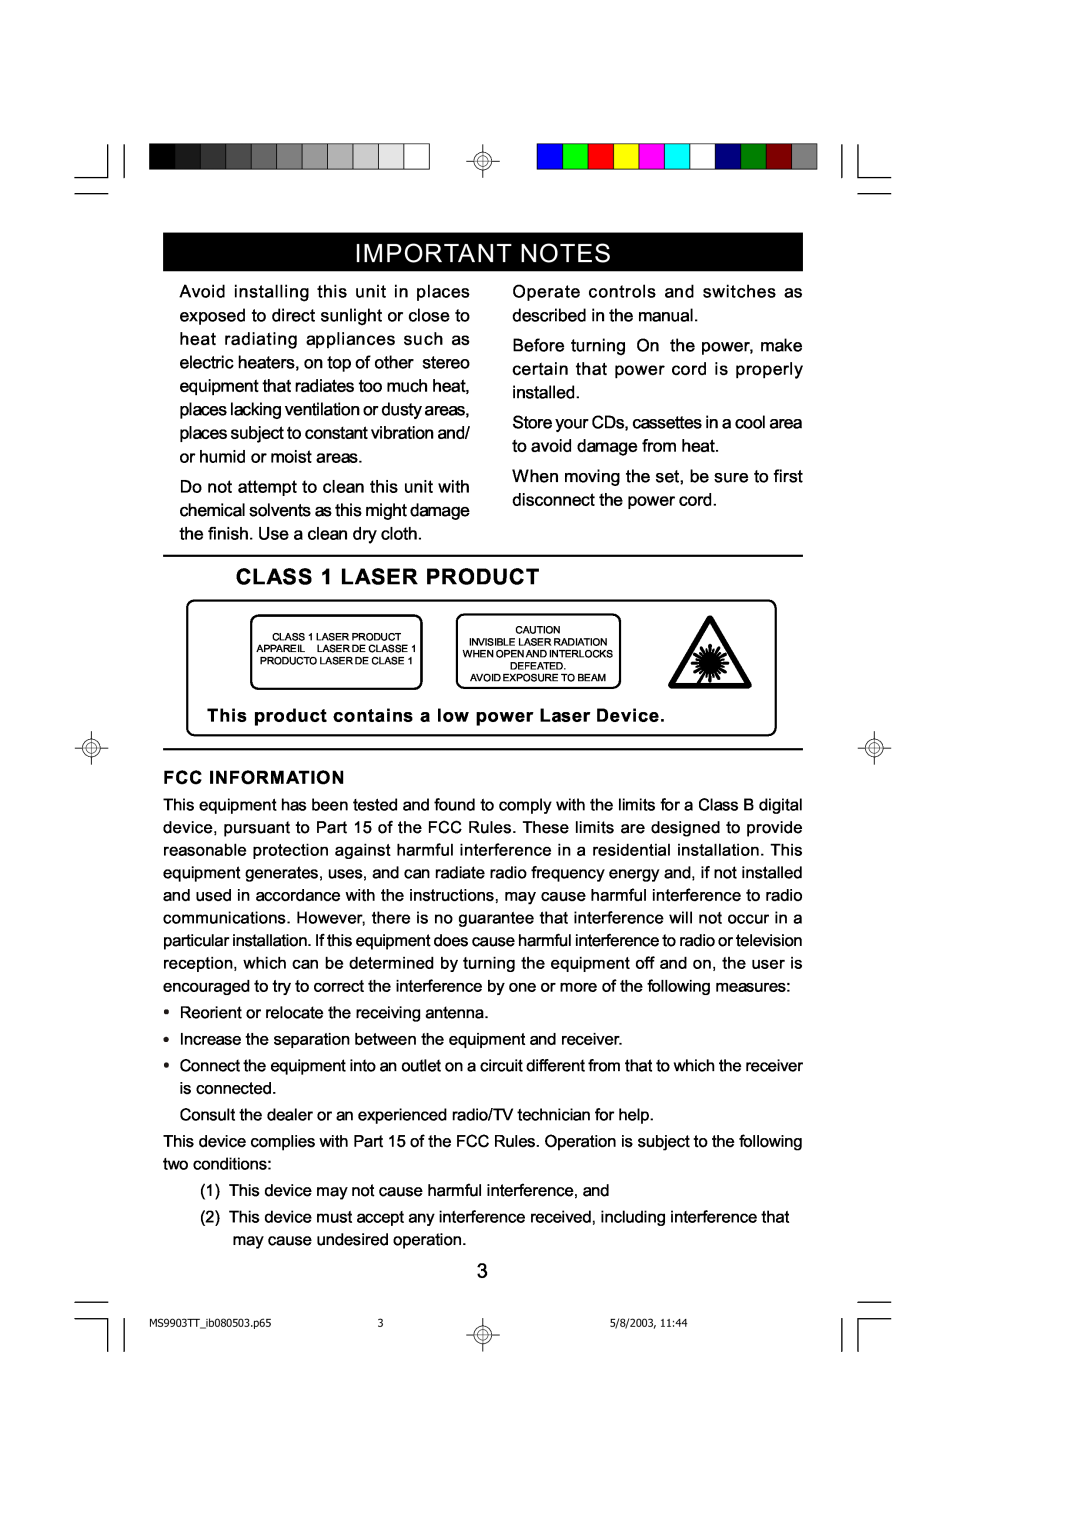 Emerson MS9904TTC owner manual CLASS 1 LASER PRODUCT, Important Notes 